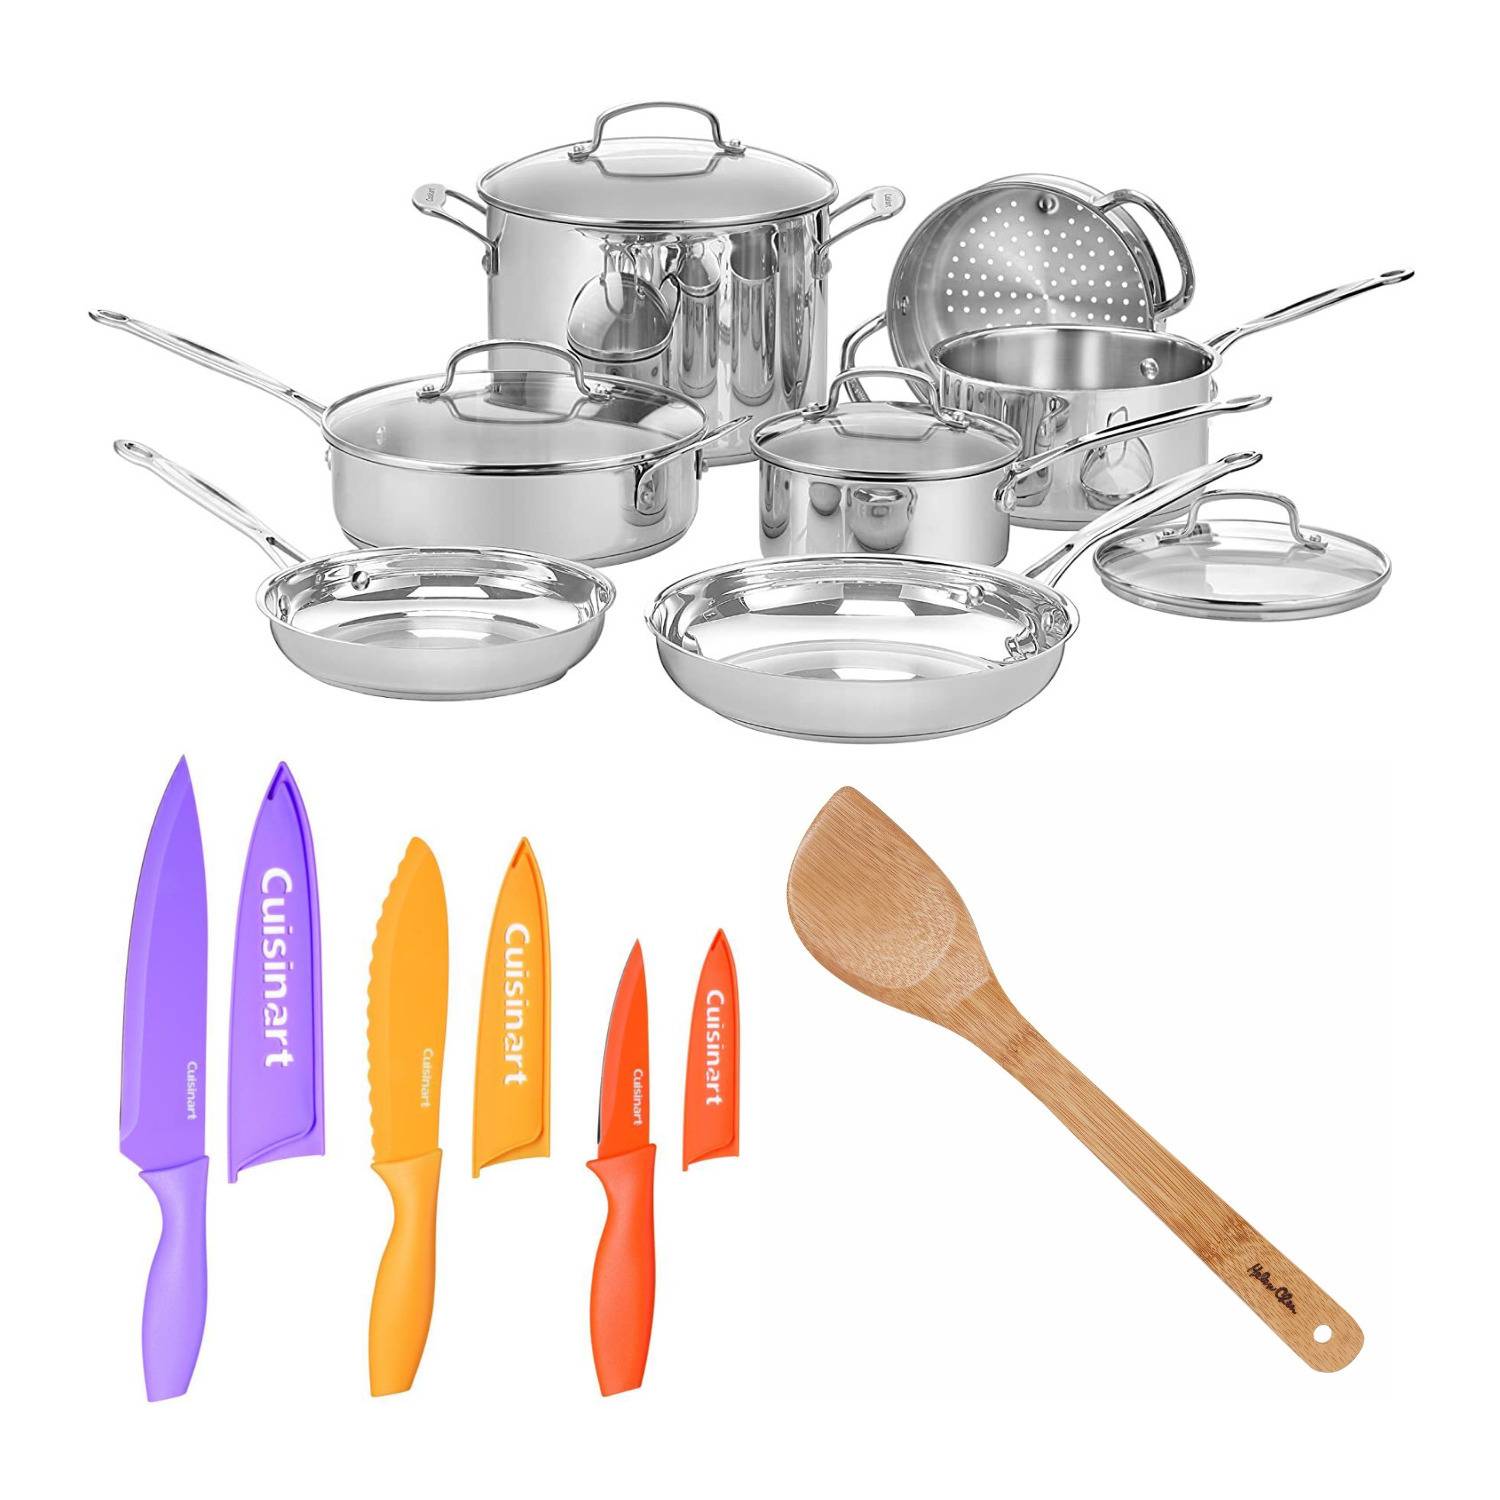 Cuisinart 77-11G Chef's Classic 11-Piece Cookware Set (Stainless) with 6-Piece Nonstick Chef Knife Set and Spatula